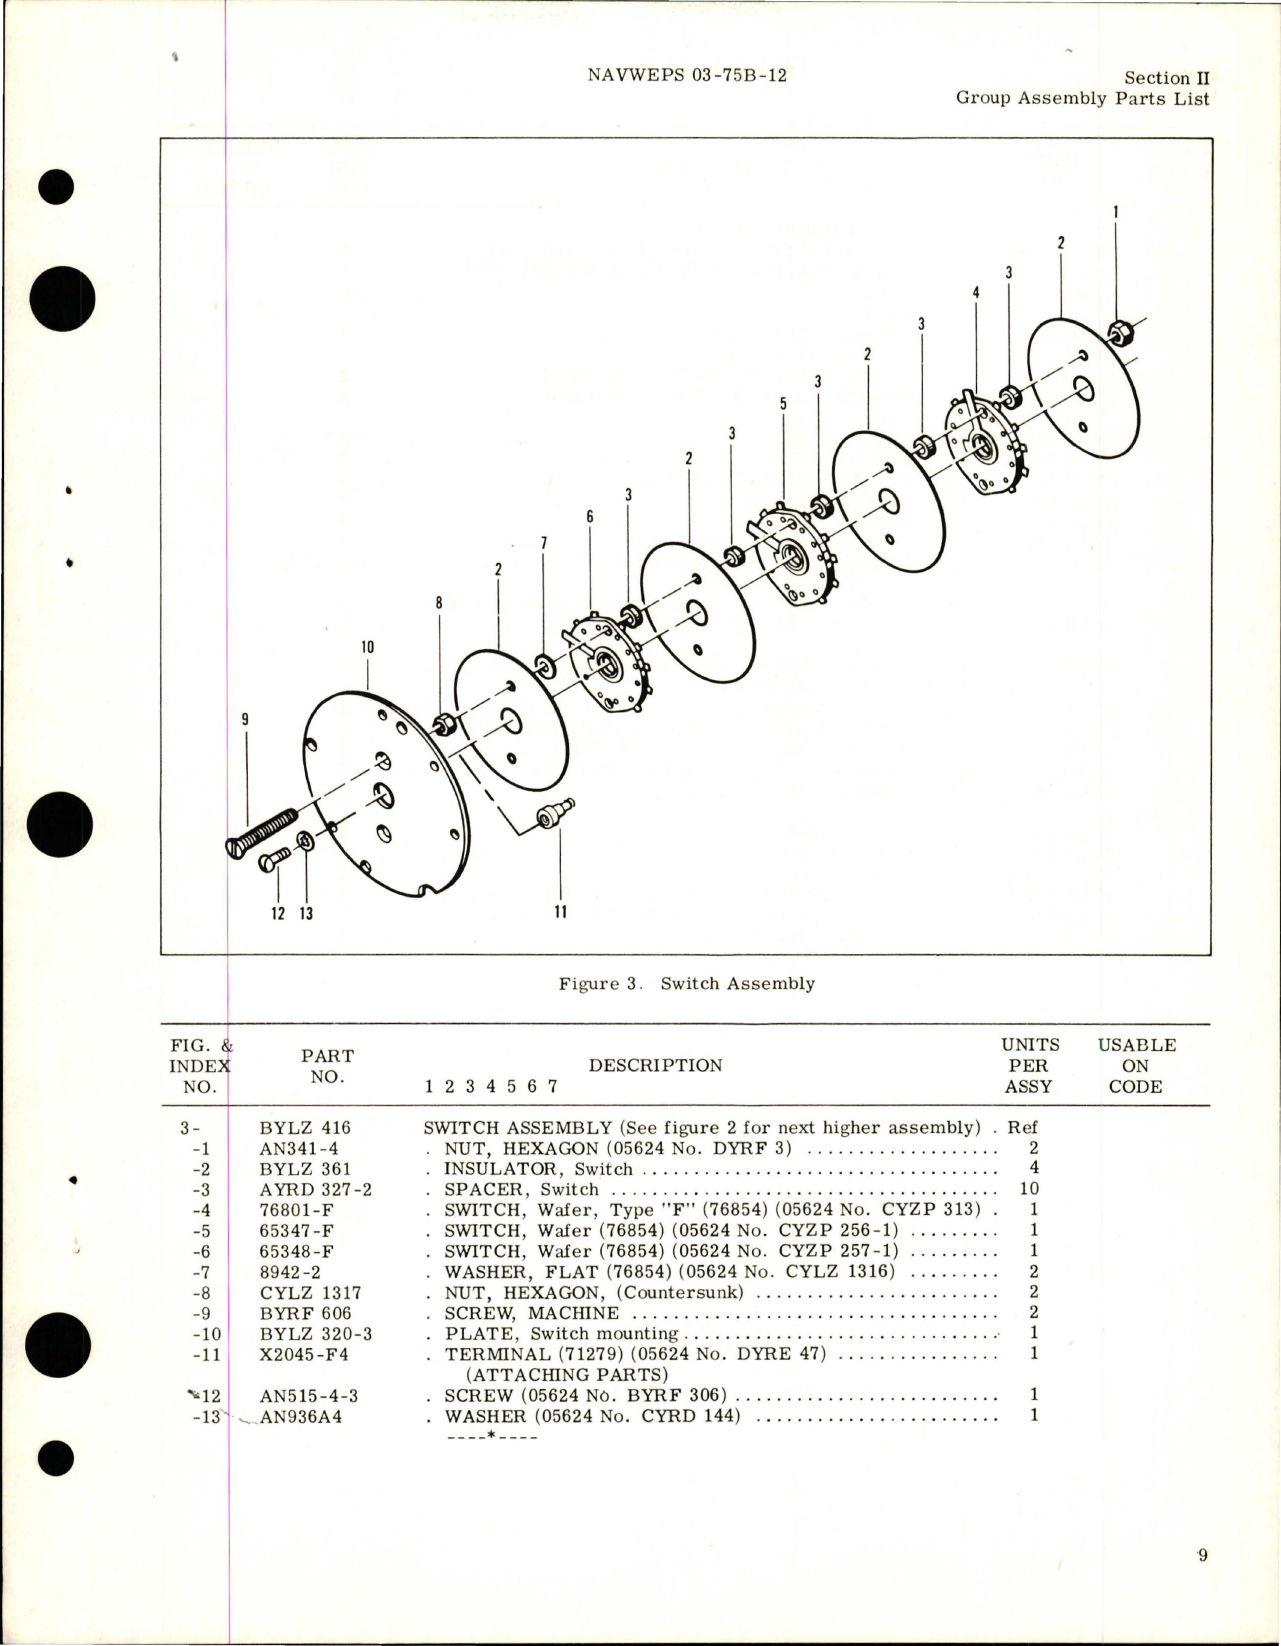 Sample page 7 from AirCorps Library document: Illustrated Parts Breakdown for Electronic Cockpit Temperature Control - Part CYLZ 5480-3